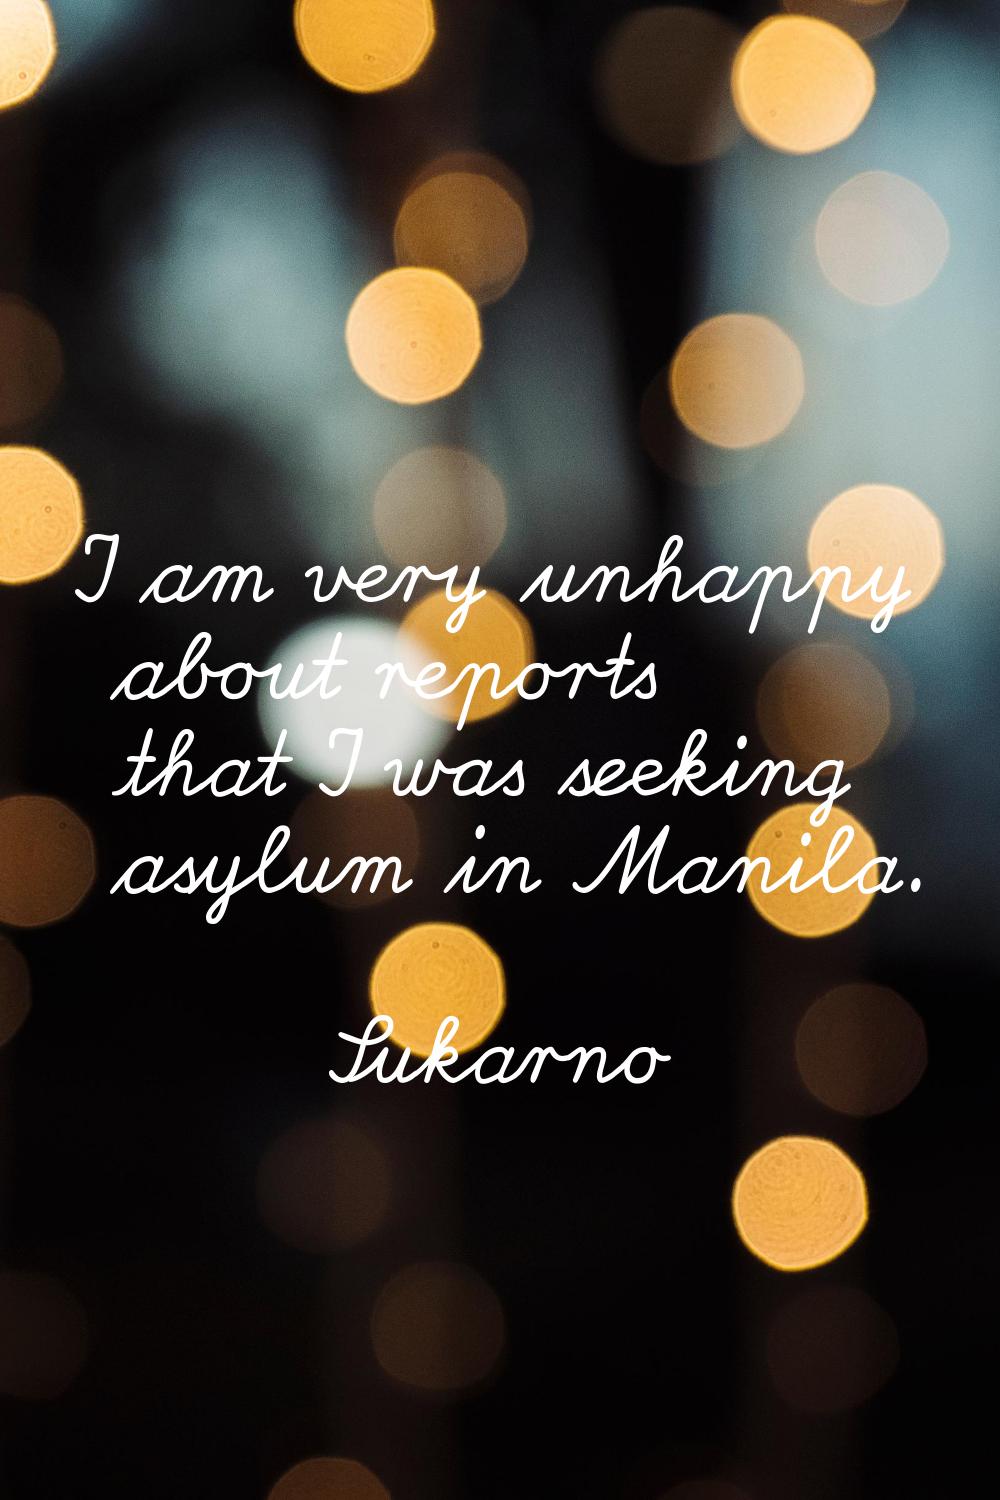 I am very unhappy about reports that I was seeking asylum in Manila.